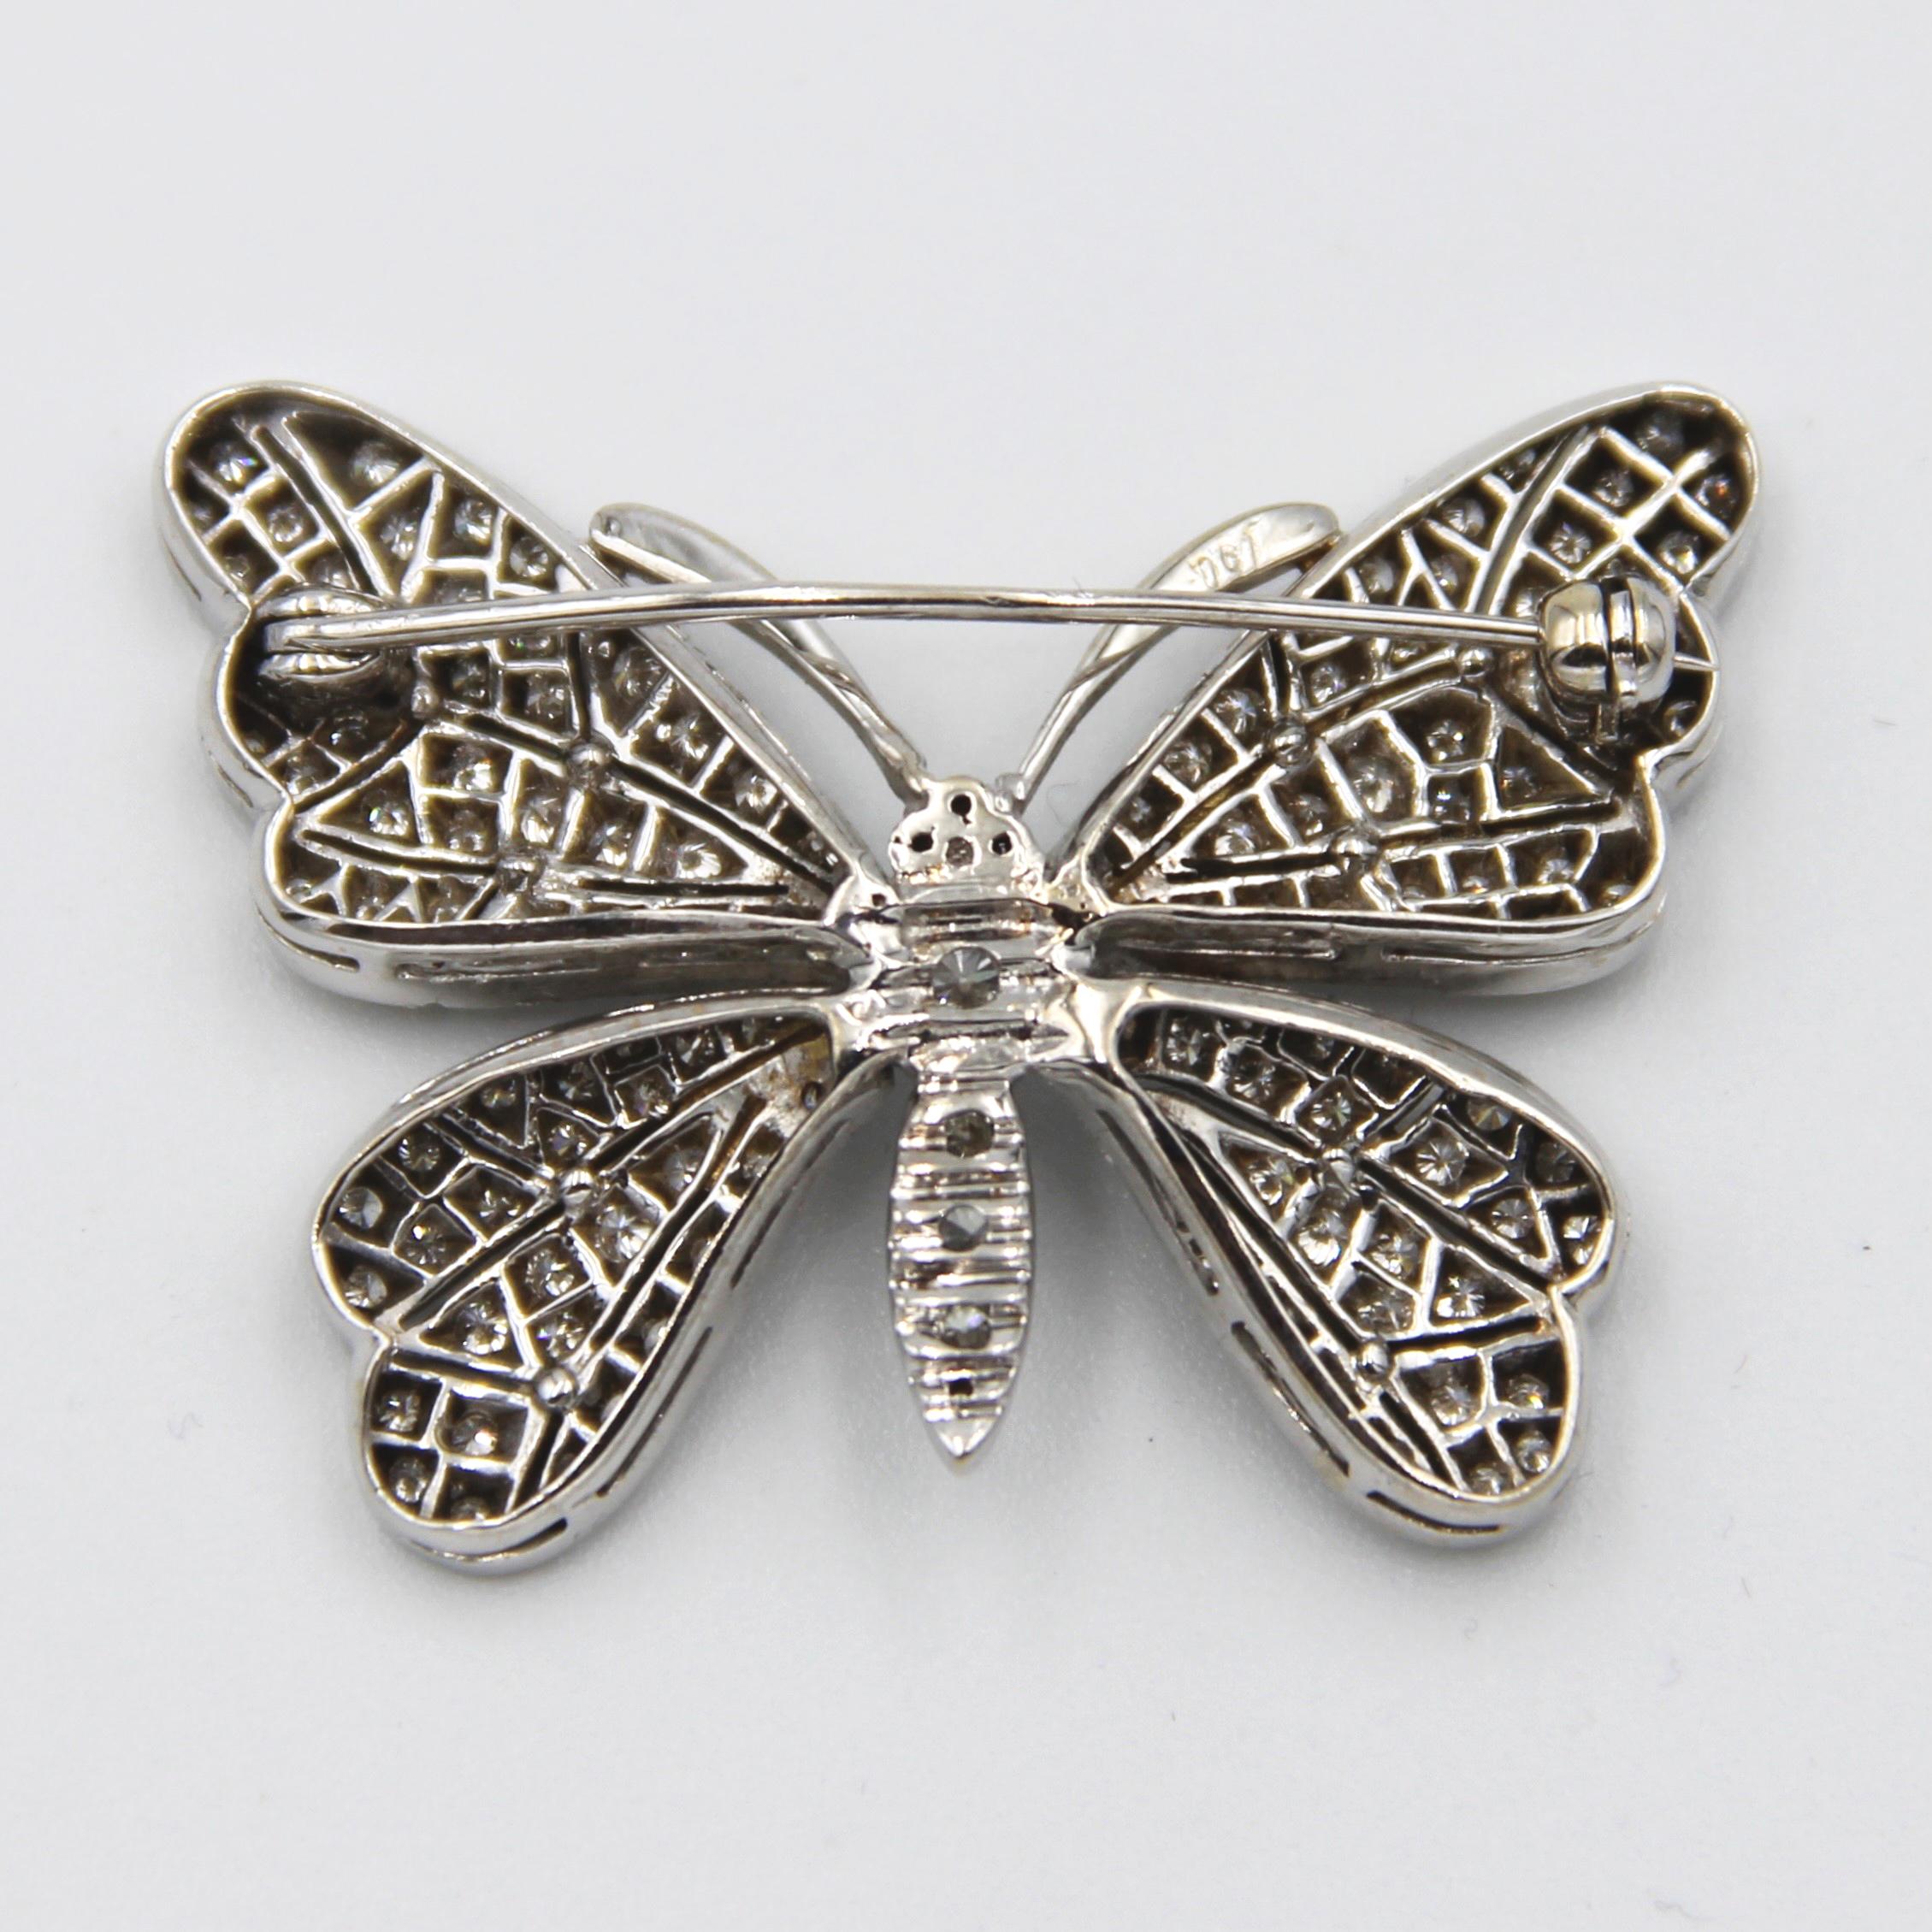 This precise made Butterfly Brooch is made of 18k white gold representing elegance. with approx. total 1.5-2 Carats of Pave diamonds. 